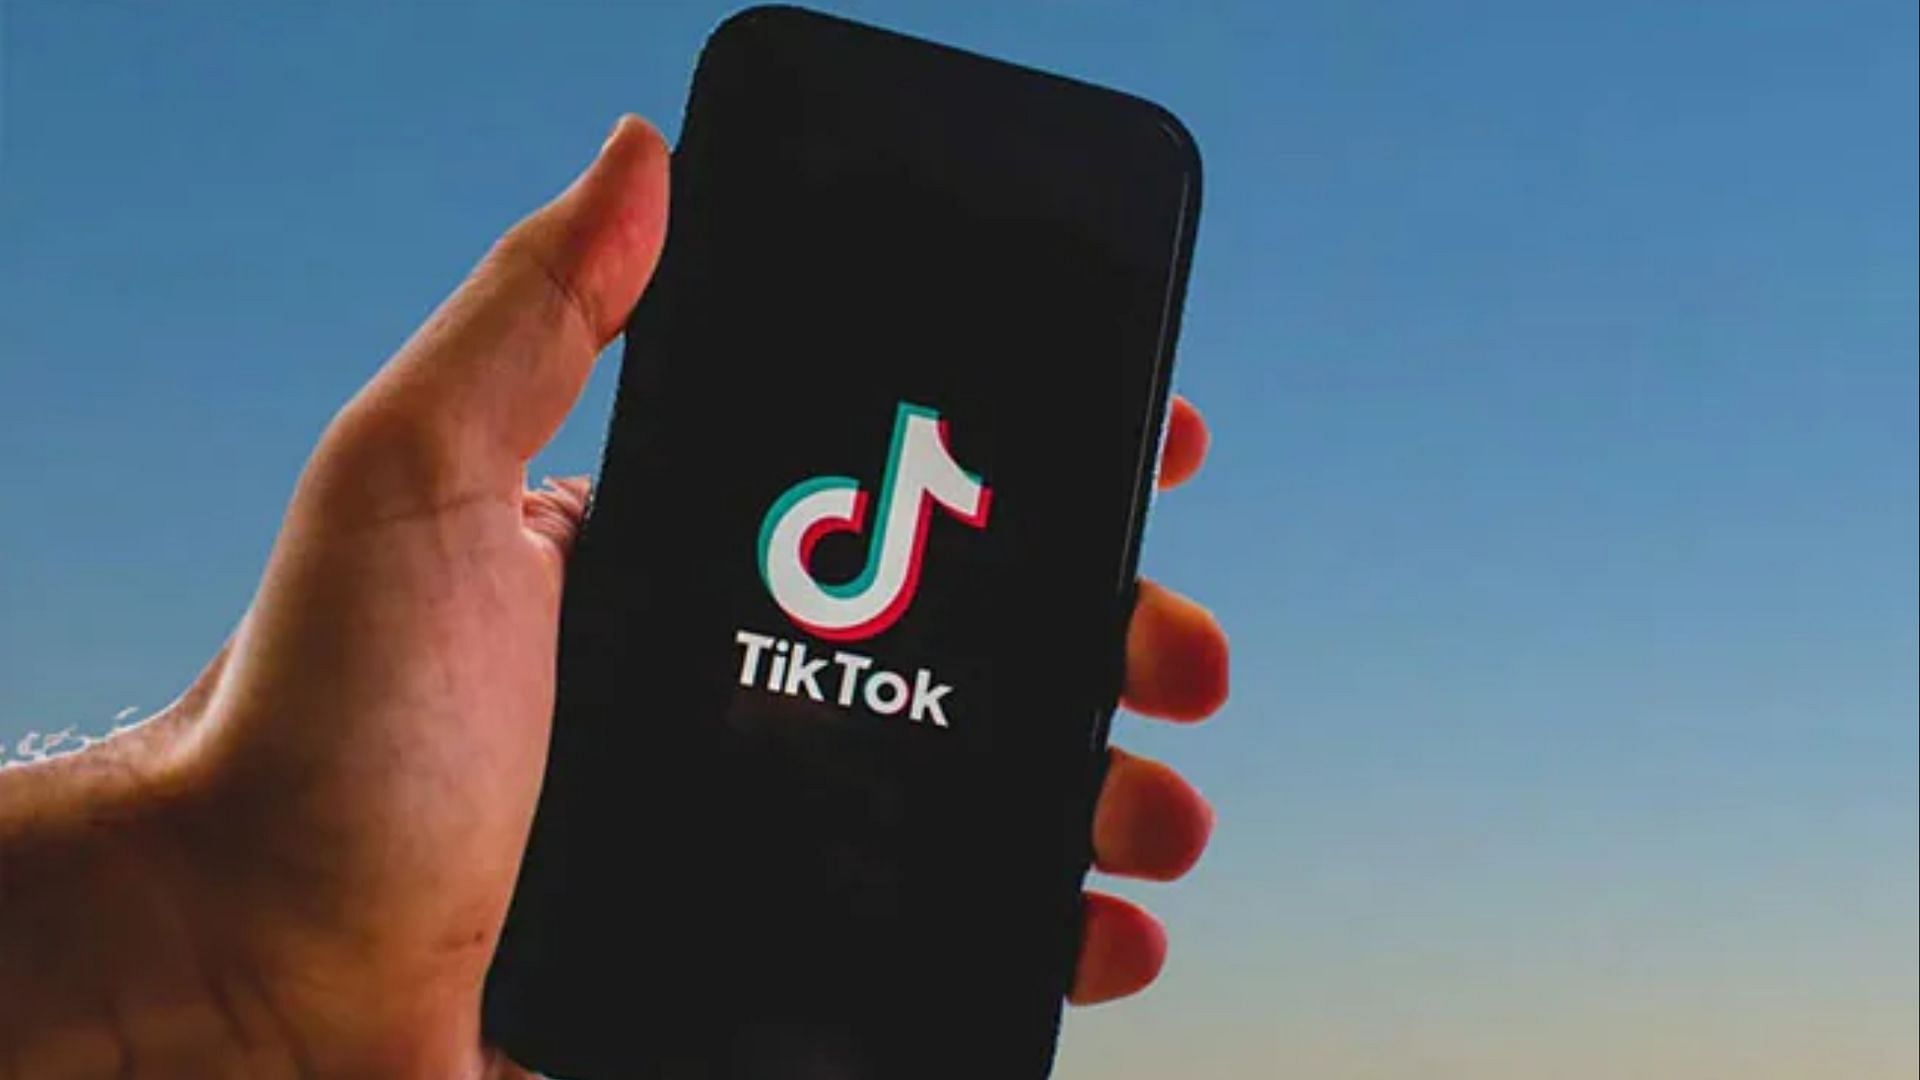 Montana passed a bill to ban TikTok on all devices in the state. (Image via Shutterstock)